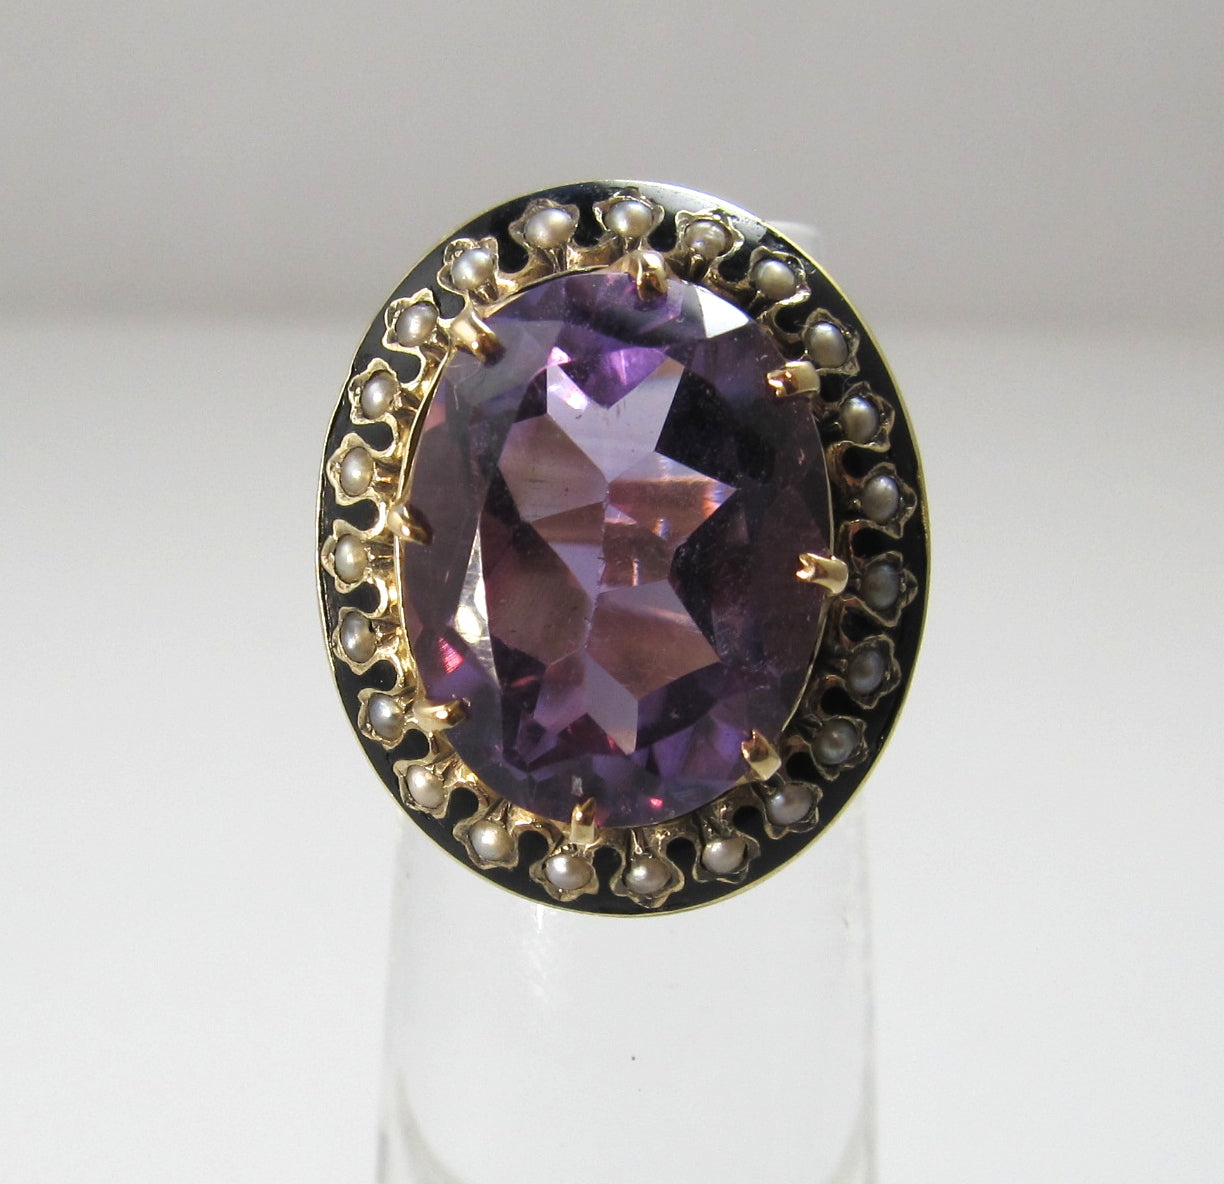 Antique 14k gold amethyst ring with pearls and black enamel